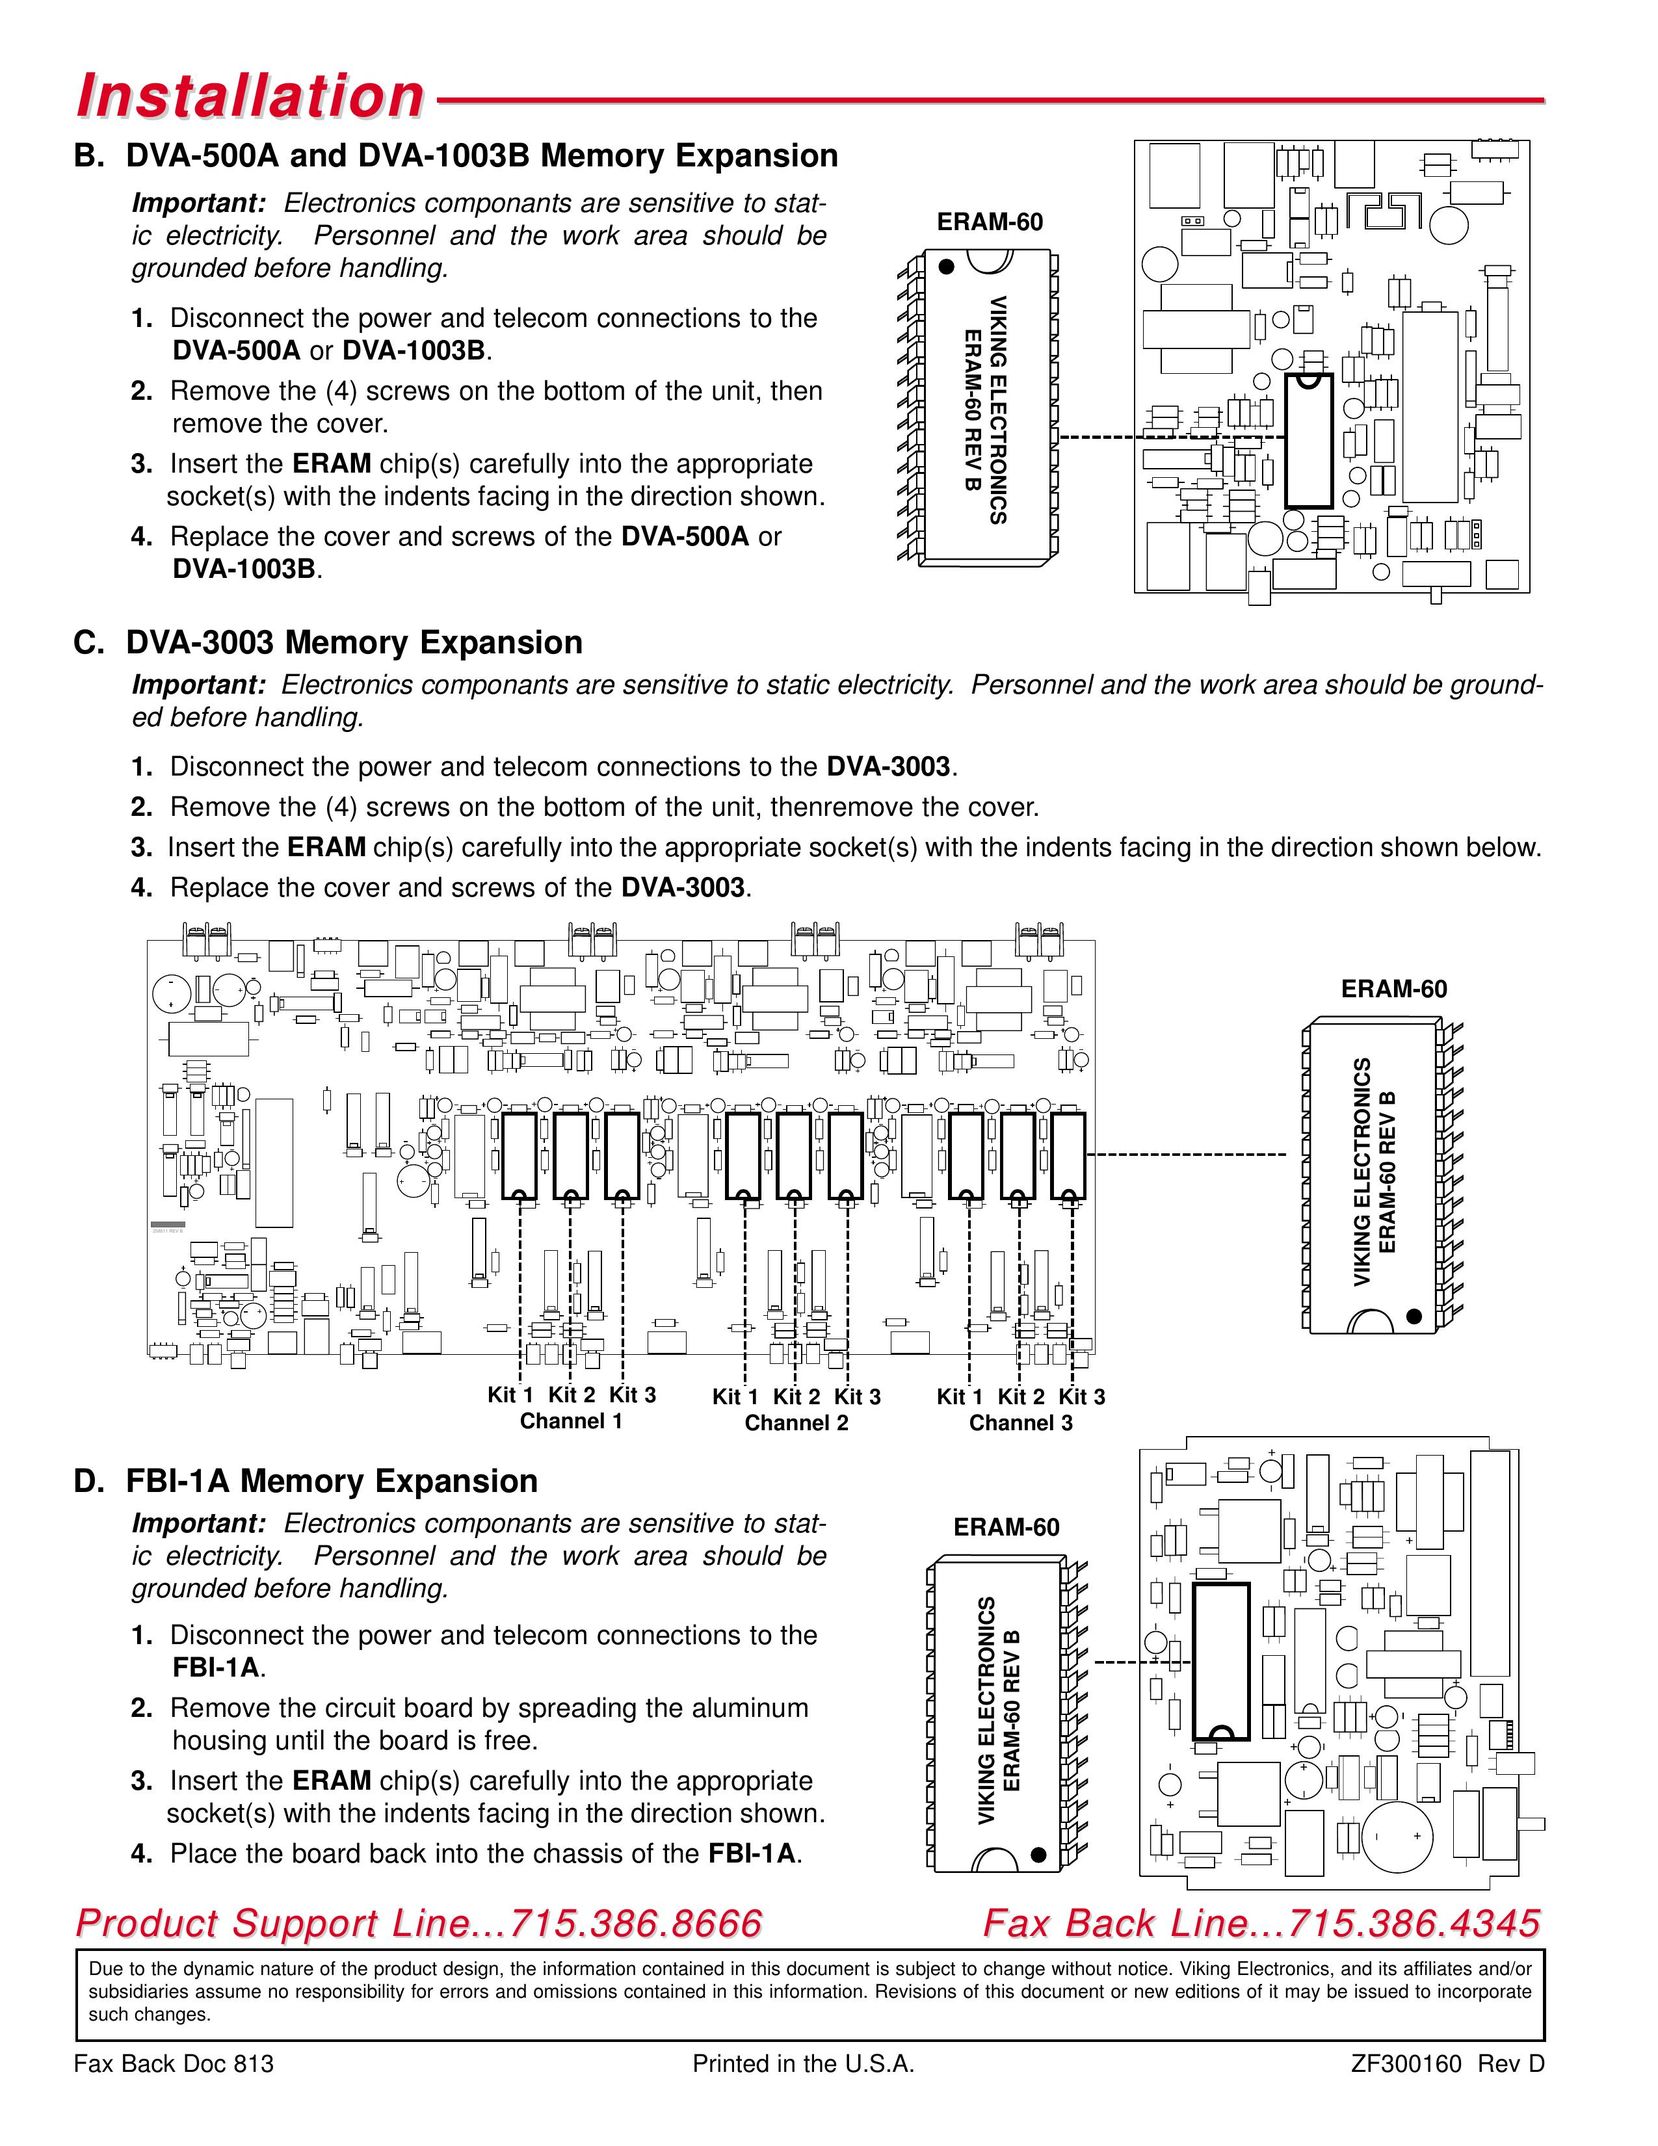 Viking Electronics DVA-500A Video Gaming Accessories User Manual (Page 2)